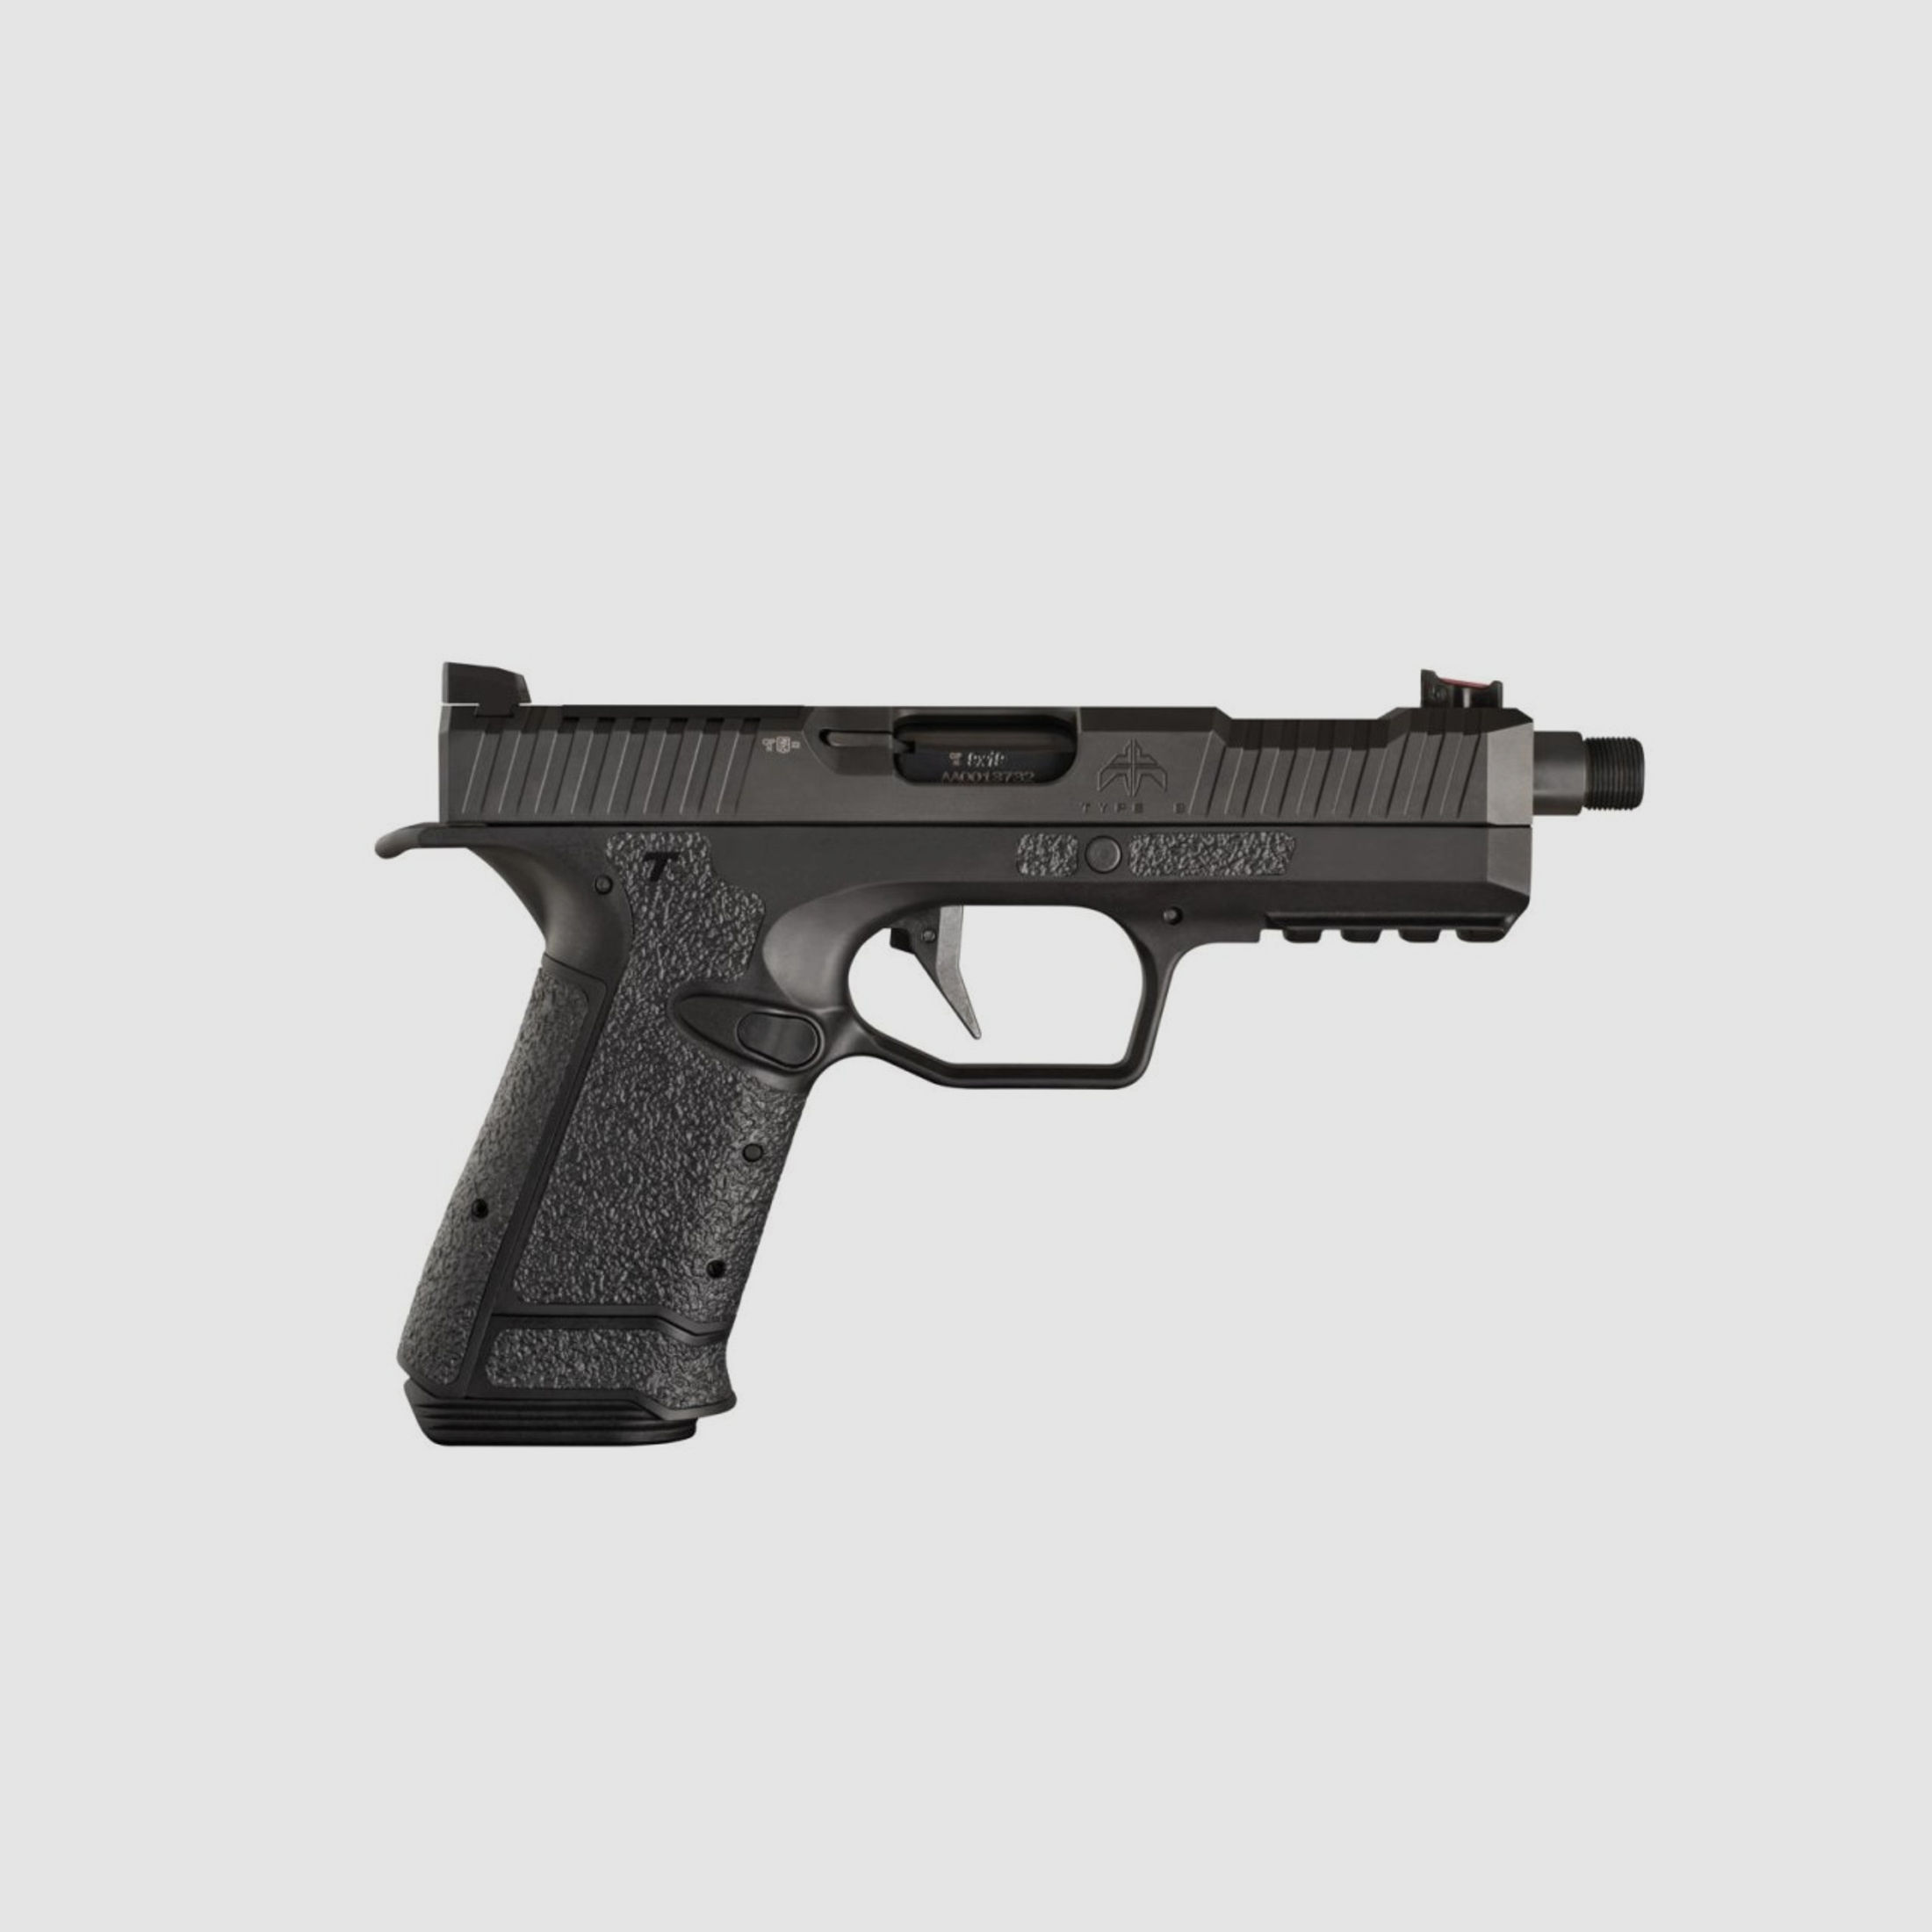 ARCHON FIREARMS - Pistole Type B OR SD